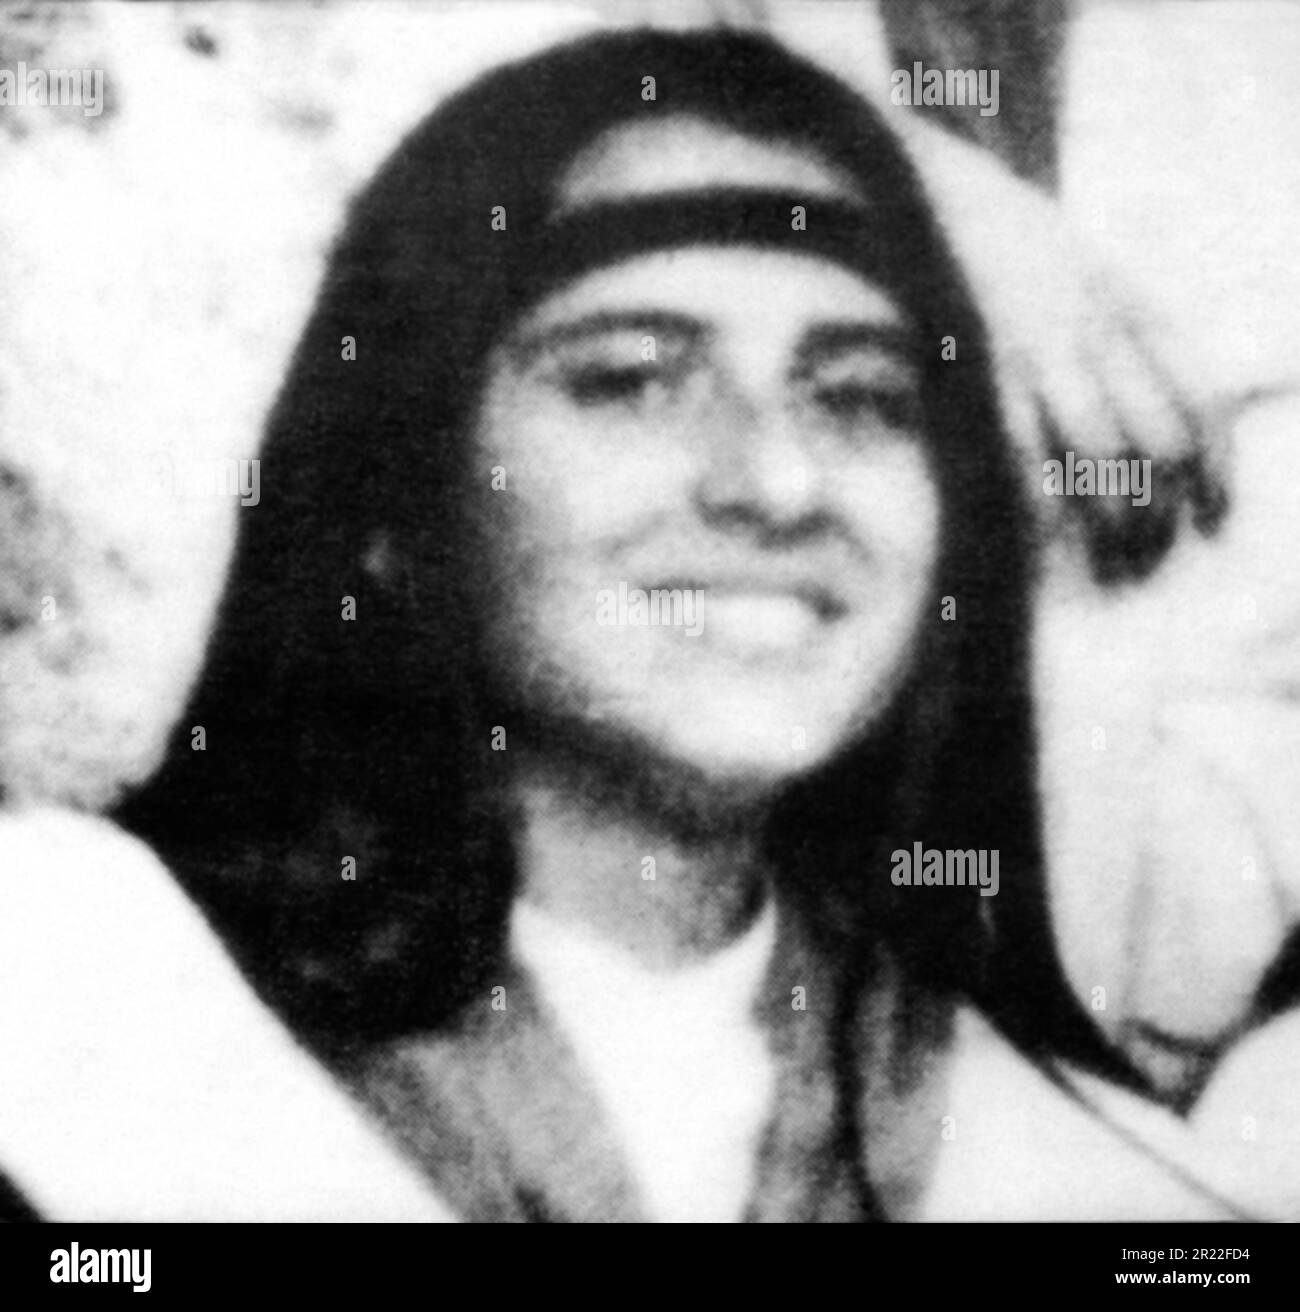 1983 , Rome , ITALY : The young girl EMANUELA ORLANDI ( 1968 -  kidnapped 1983 ) . One of most famous unsolved crime ' cold case ' in Italian history . Desappeared the day 22 june 1983 , aged 15 . In this photo the Emanuela portrait on the  posters signaling his kidnapping which for years have plastered the walls of the city of Rome , have it posted at the expense of the family members . Unknown photographer . - CRONACA NERA - kidnapping - abduction - portrait - ritratto - sparizione - sparizione - sparita - REWARD - SCOMPARSA - RAPIMENTO - MISTERO - MISTERY - crimine - criminalità Stock Photo